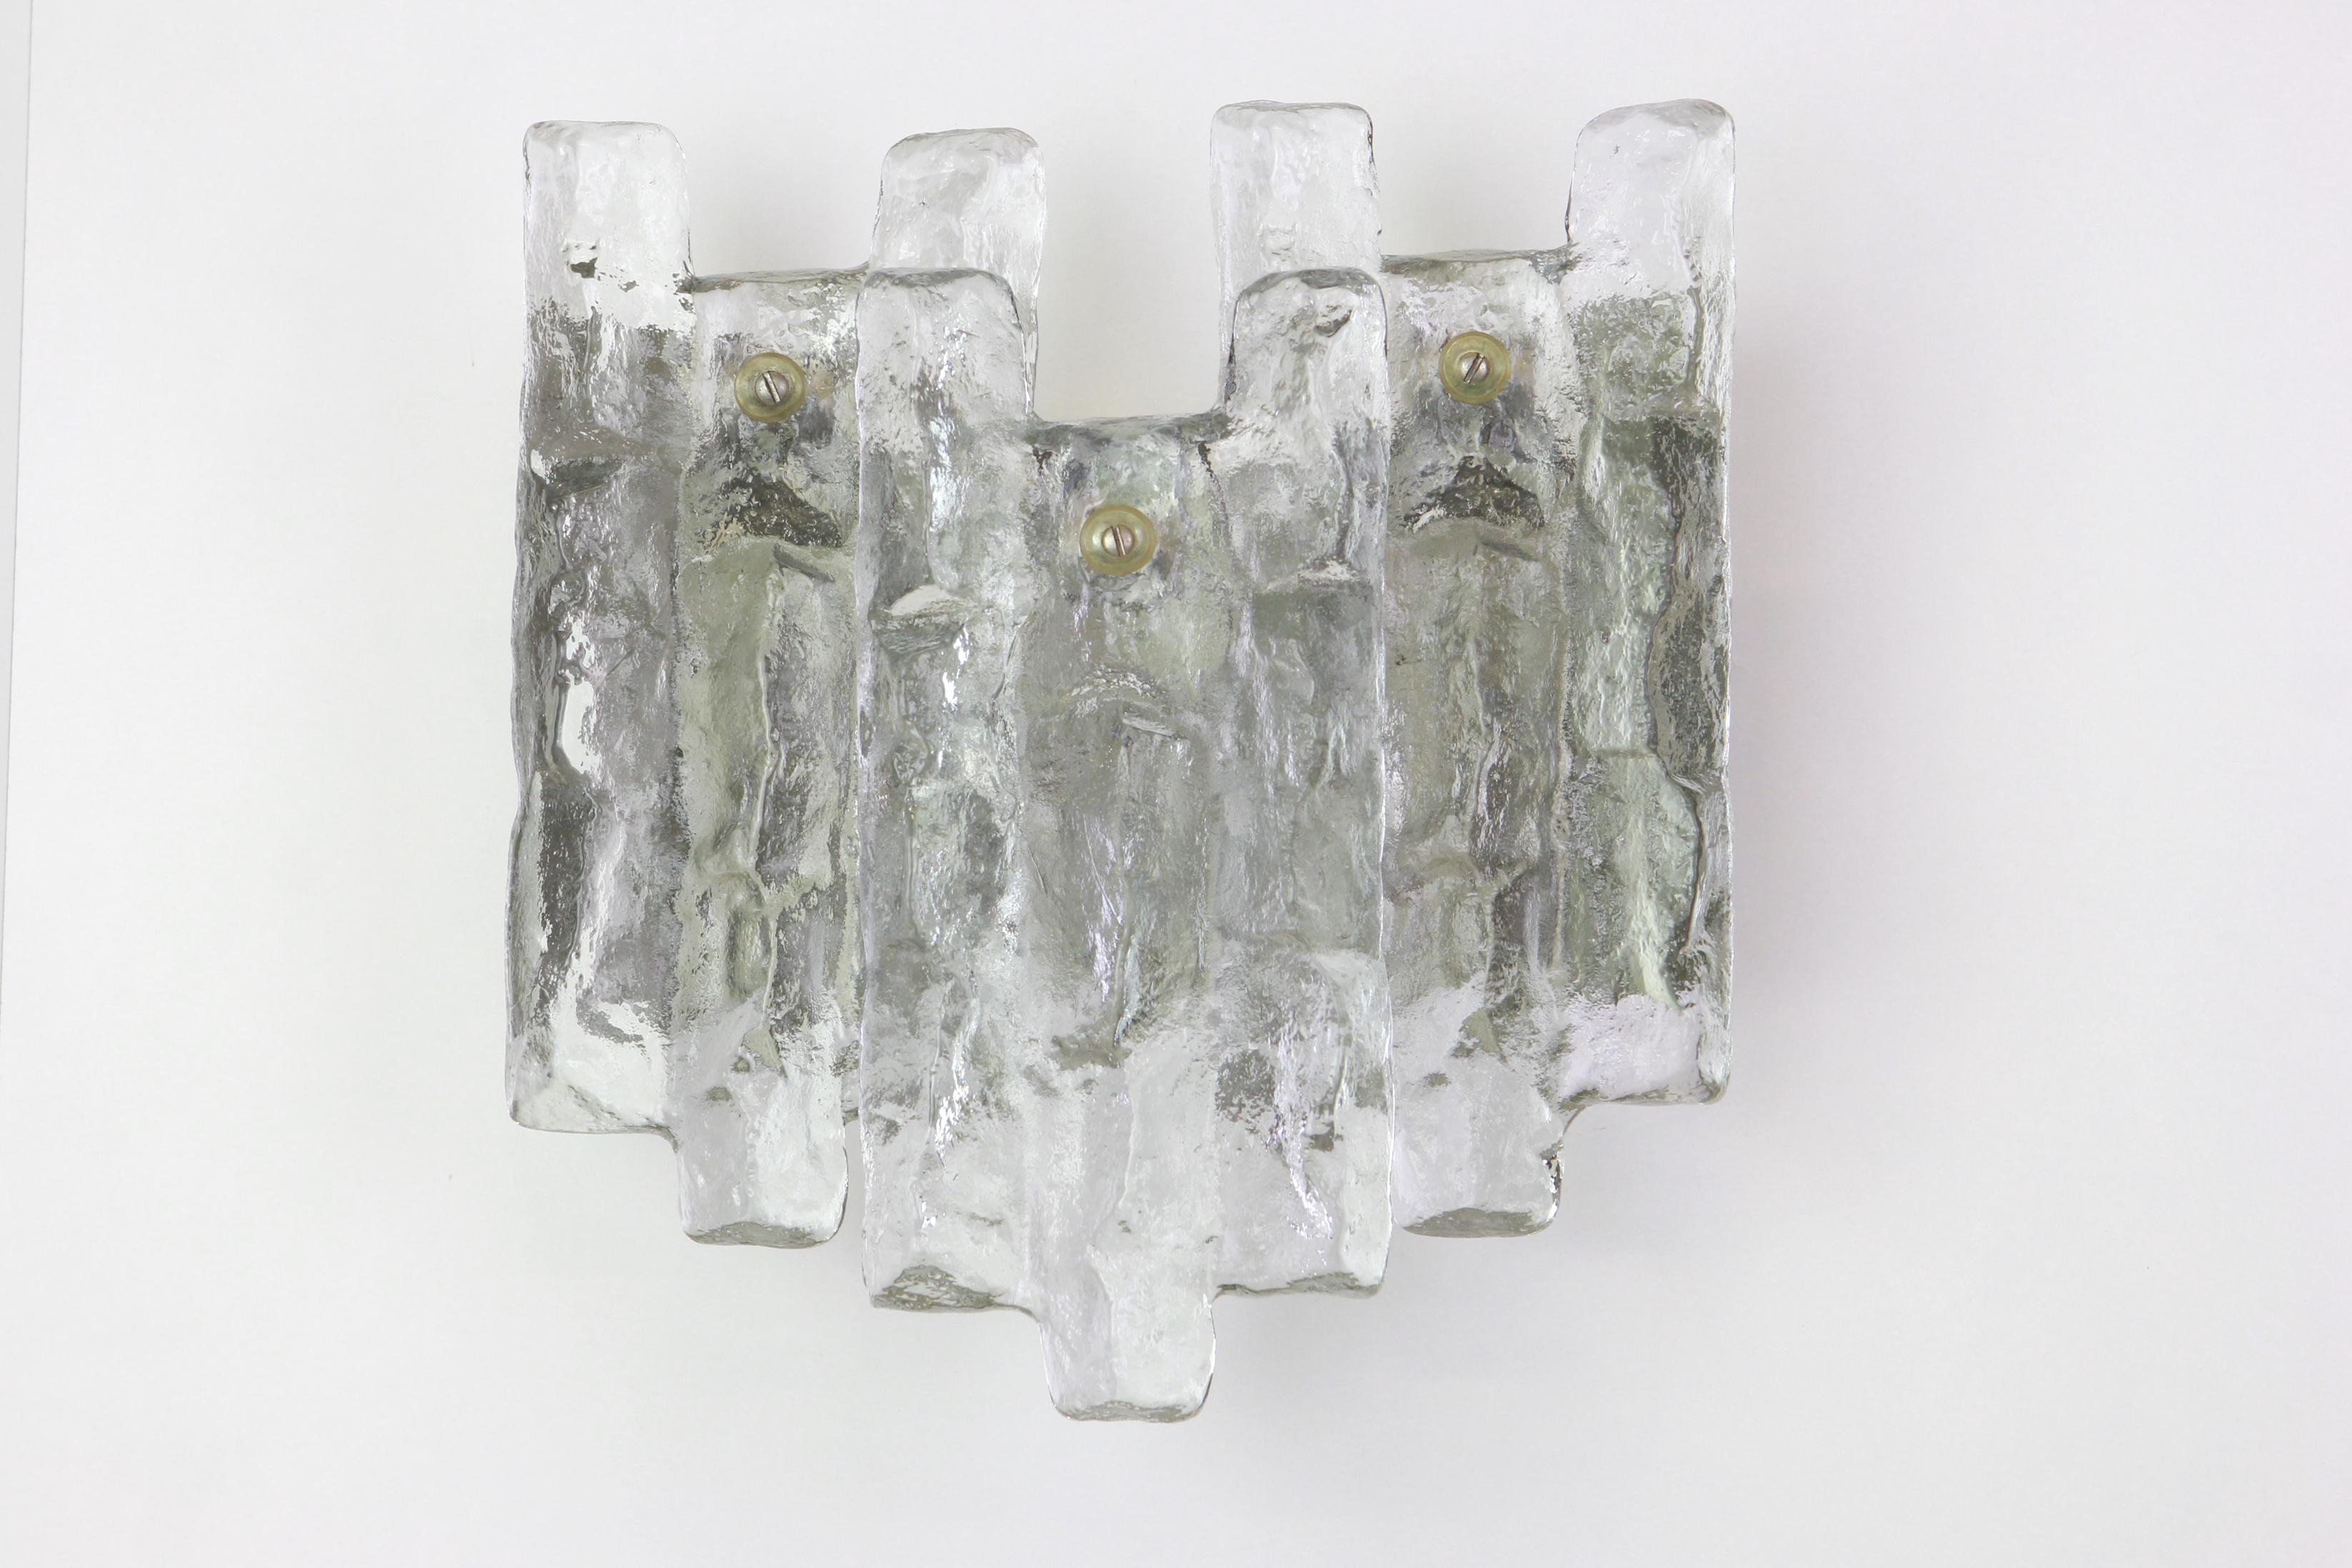 Wonderful pair of midcentury wall sconces with three large Murano glass pieces in each lamp, made by Kalmar, Austria, manufactured, circa 1960-1969.

High quality and in very good condition. Cleaned, well-wired and ready to use. 

Each sconce